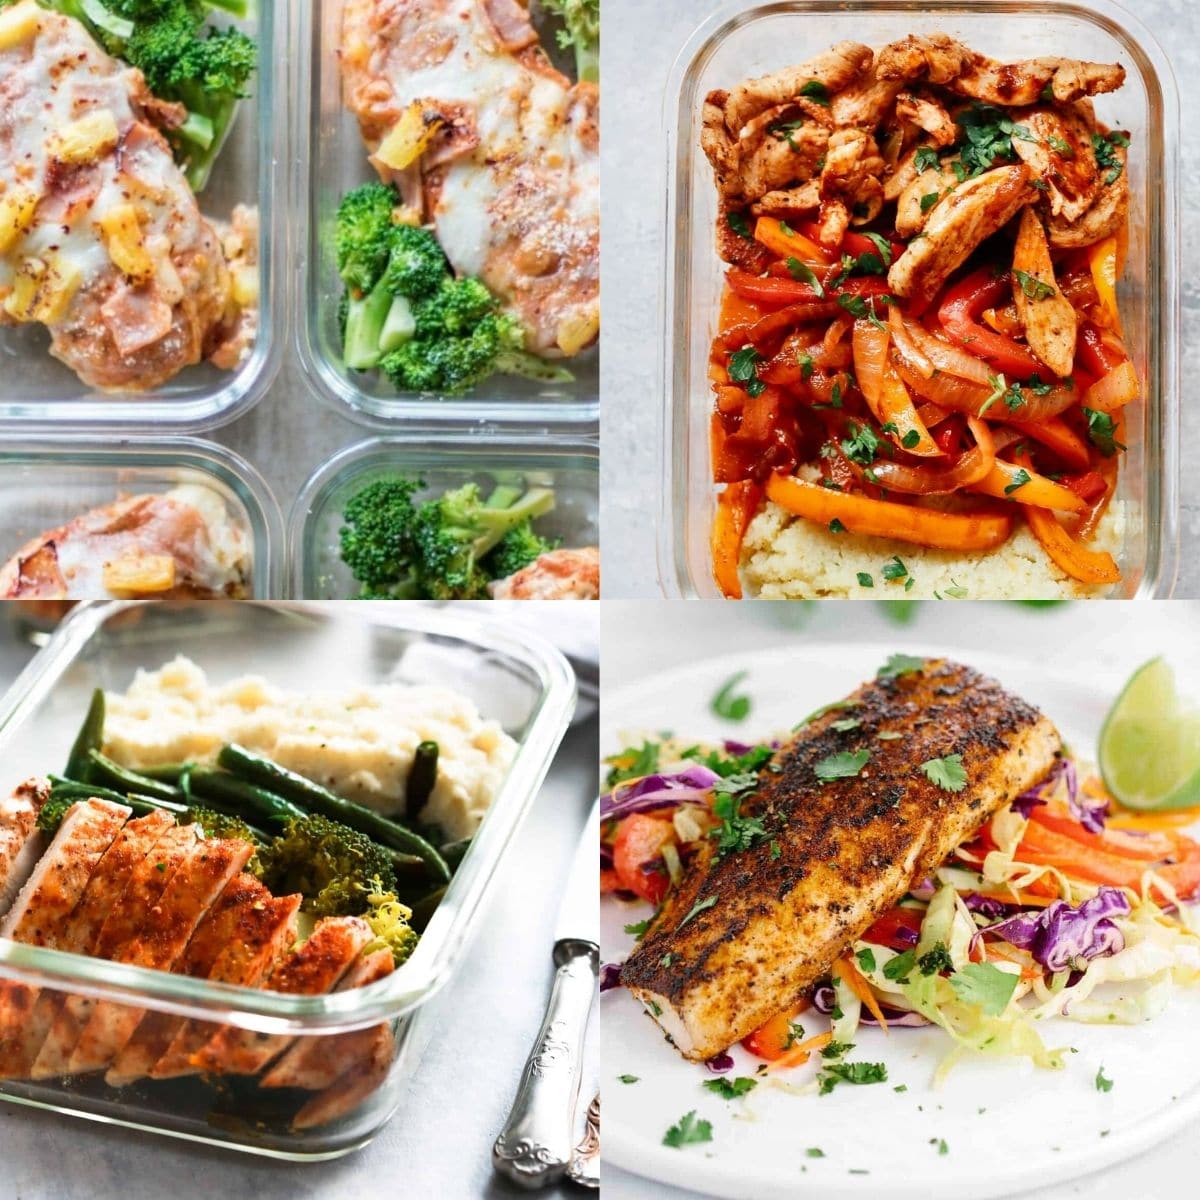 25 Delish High Protein Lunches for Work